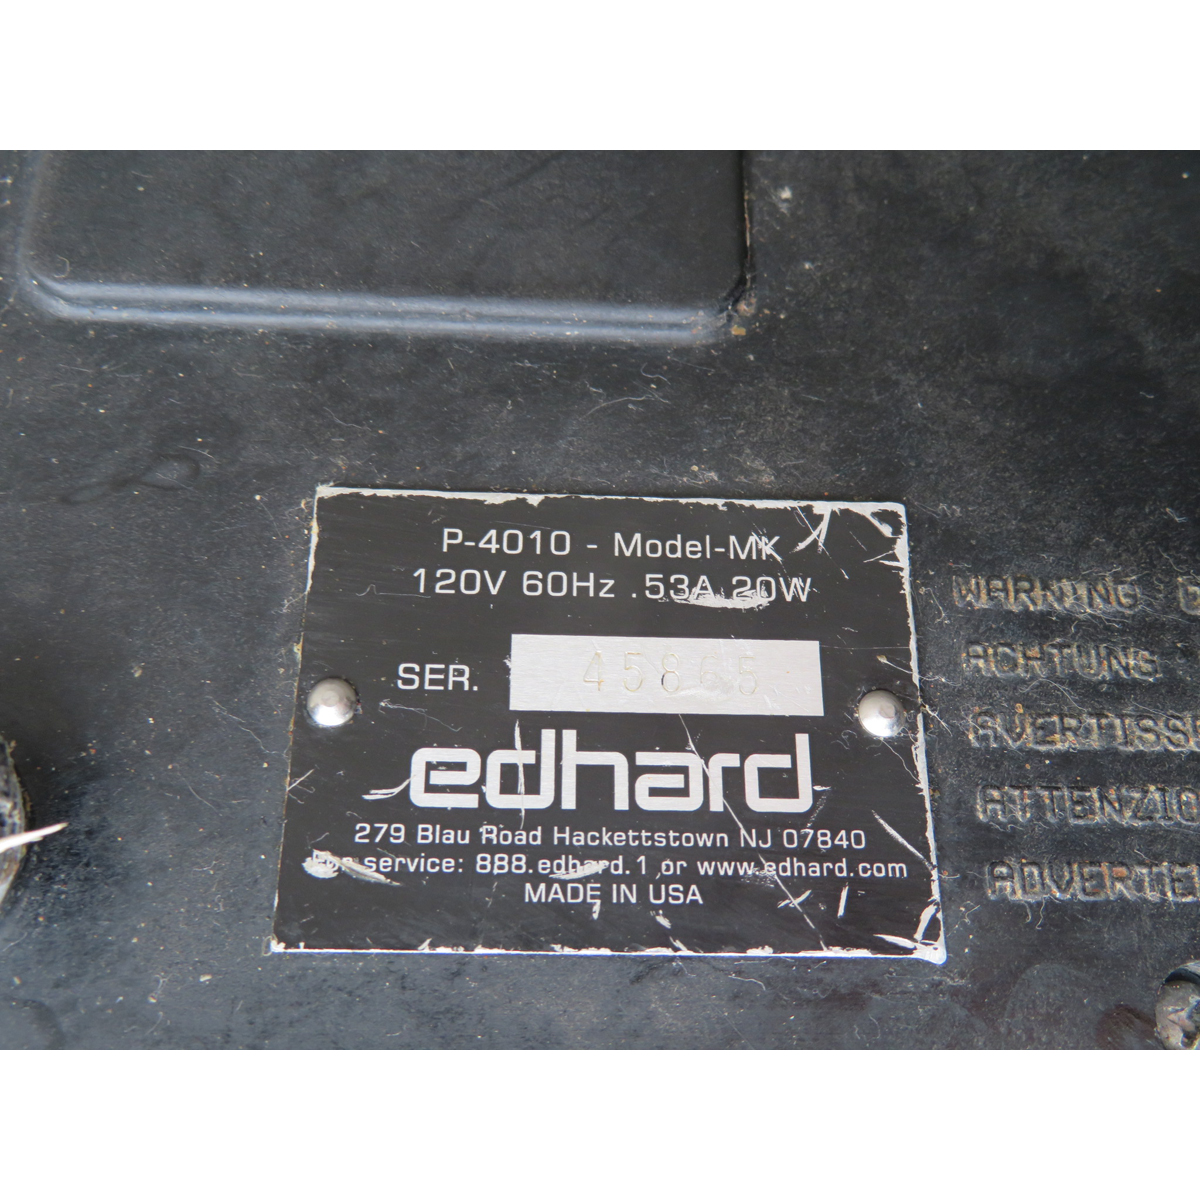 Edhard P-4010 Power Base for Donut Filler with Hopper & Extension Spout, Used Excellent Condition image 2